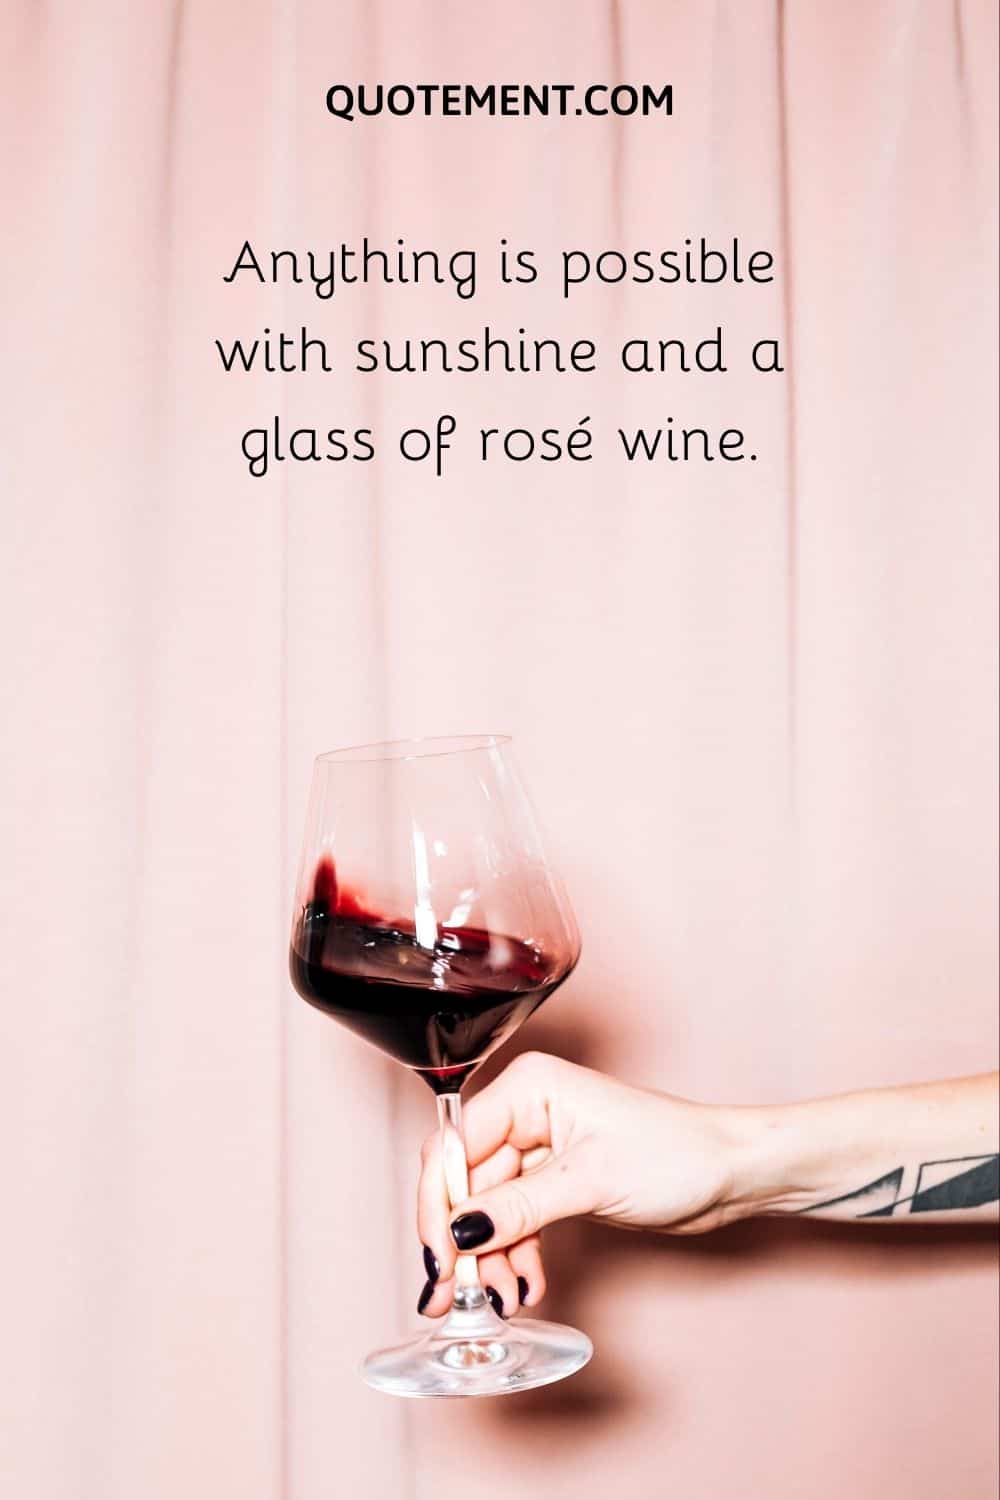 Anything is possible with sunshine and a glass of rosé wine